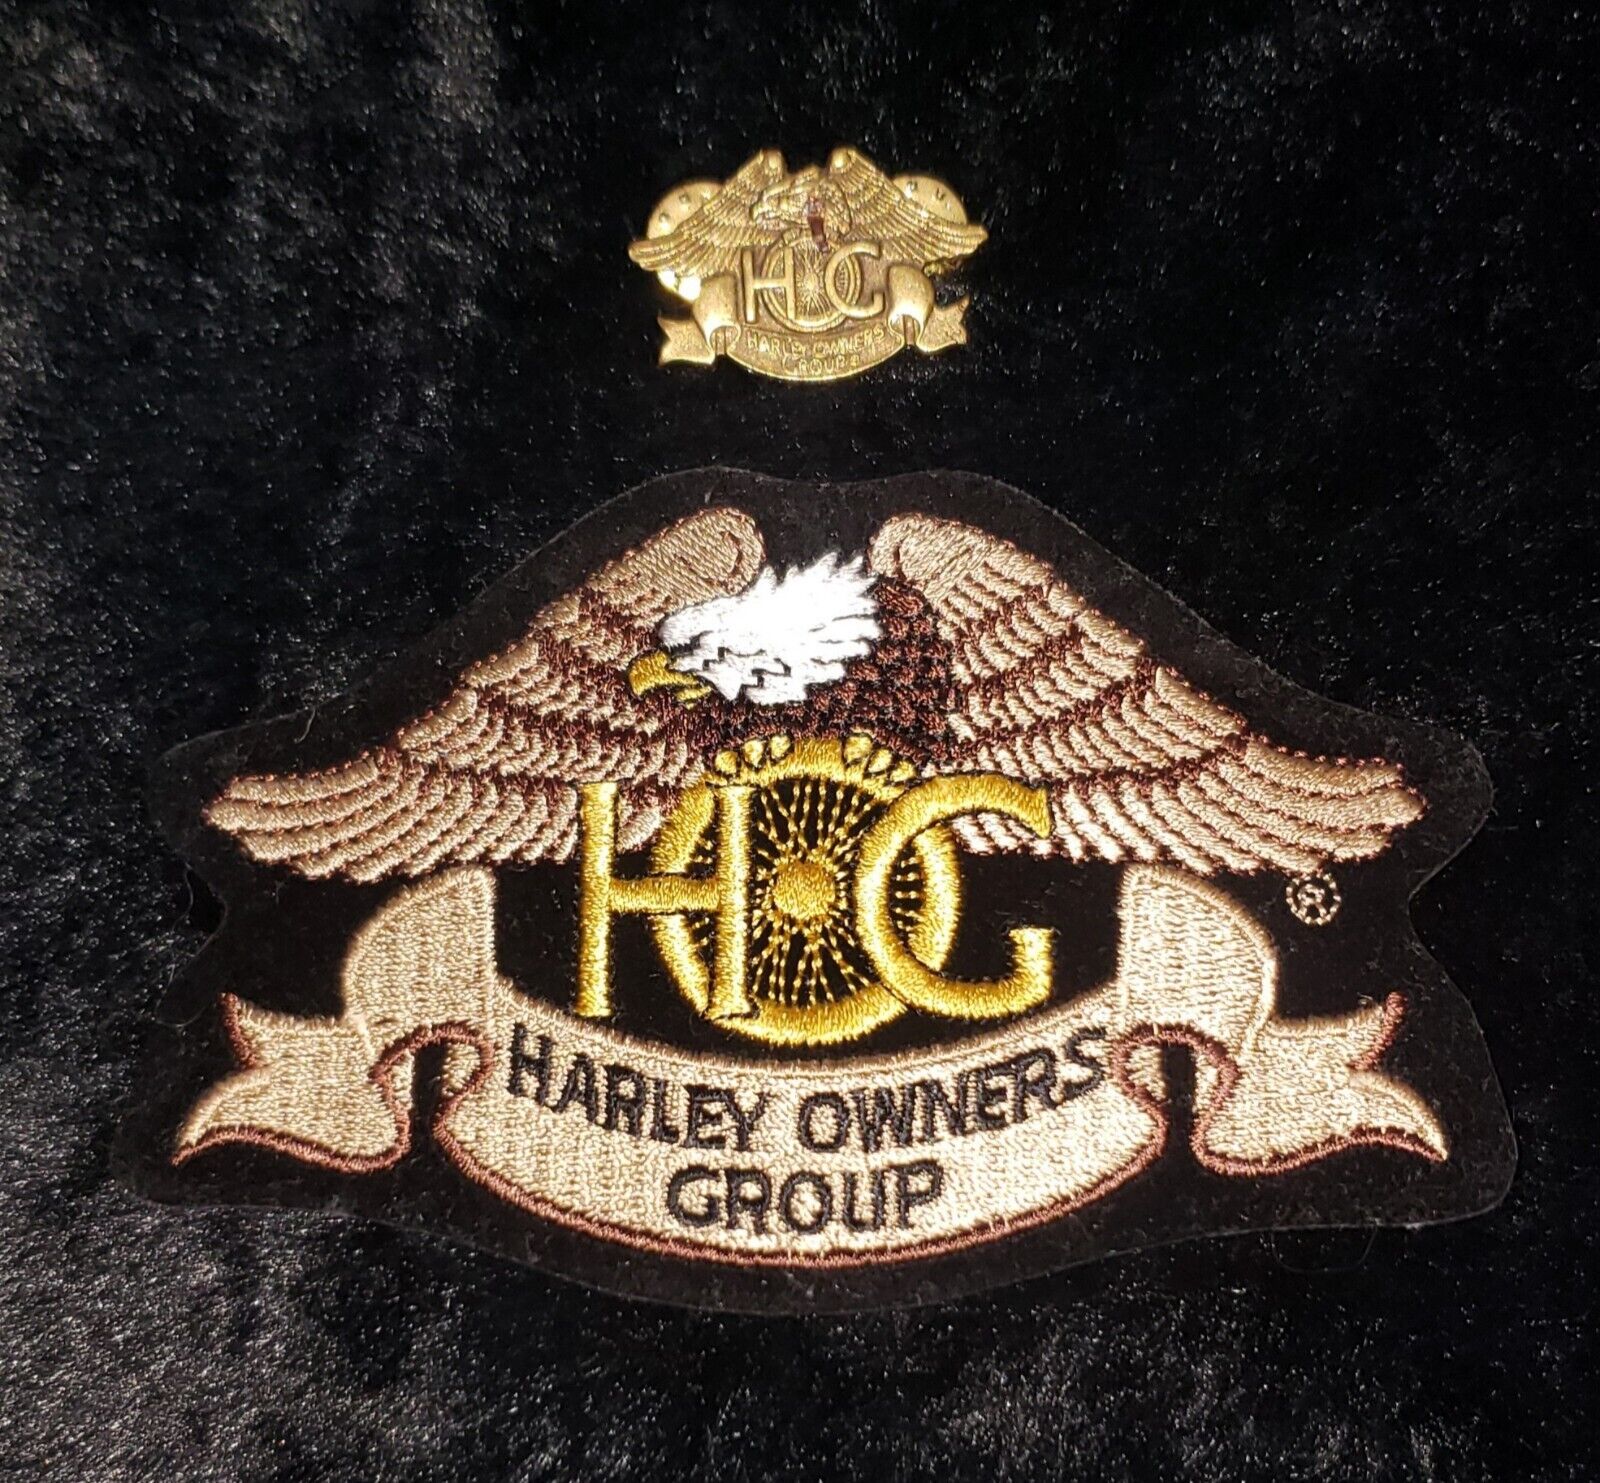 Harleys Owners Group Patch & Pin Set HARLEY DAVIDSON OWNERS GROUP 